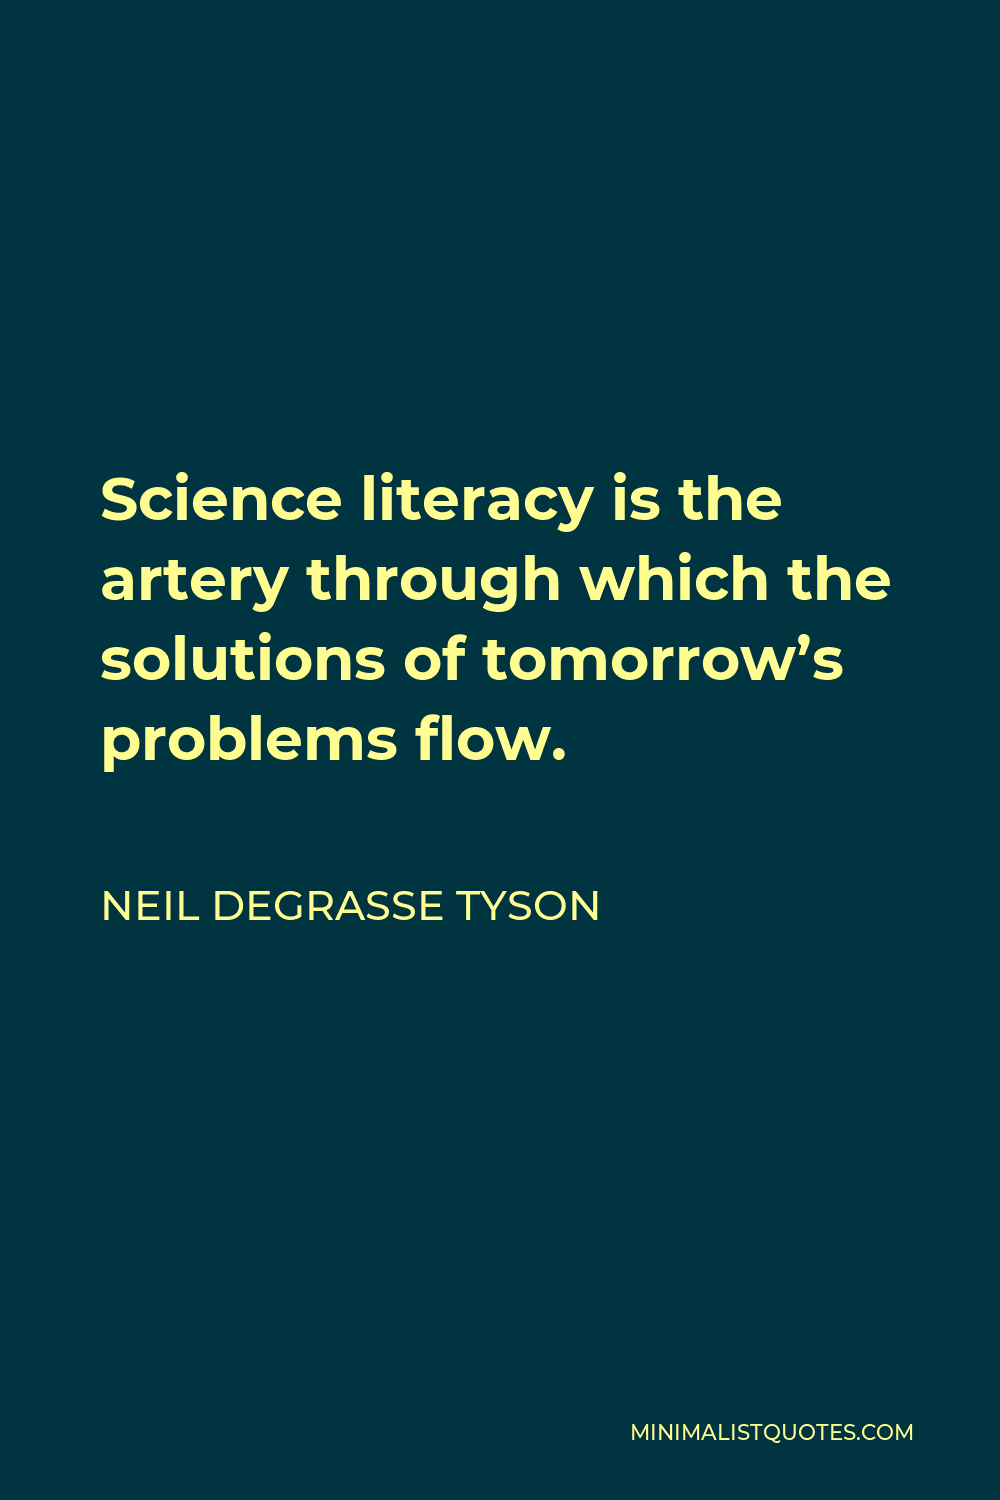 Neil deGrasse Tyson Quote - Science literacy is the artery through which the solutions of tomorrow’s problems flow.